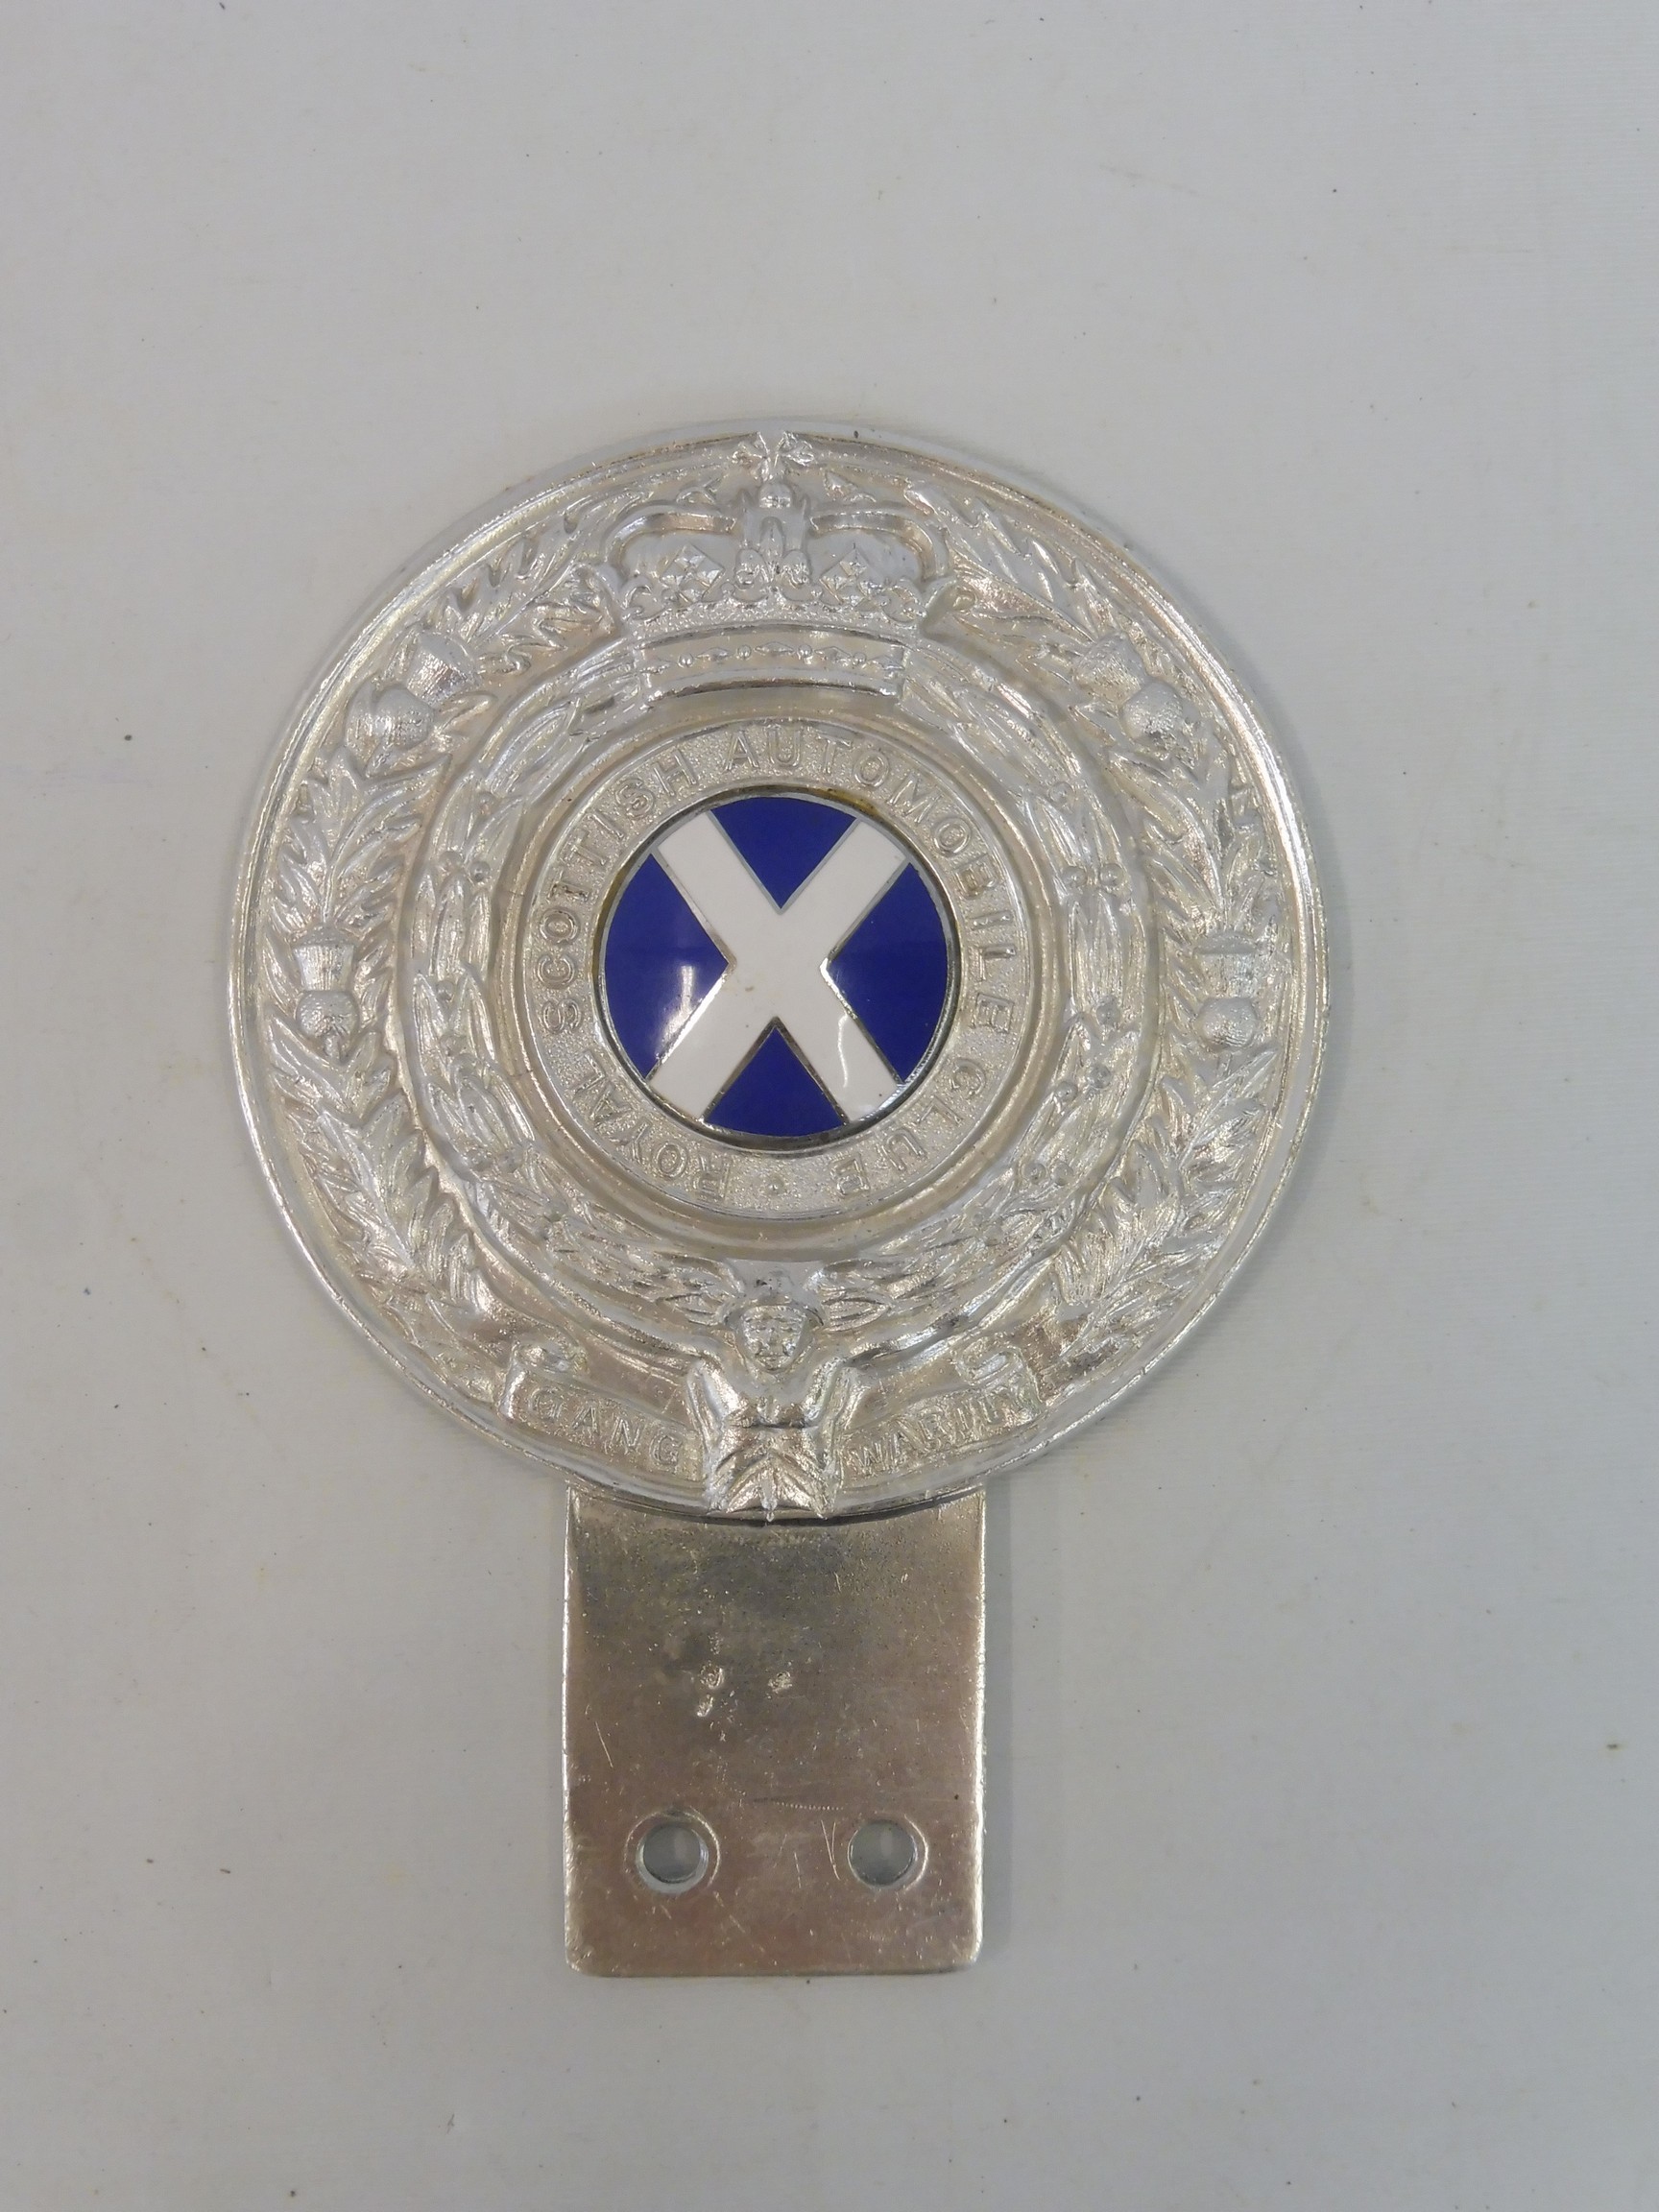 A Royal Scottish Automobile Club badge radiator mounted, pressed alloy and enamel centre.